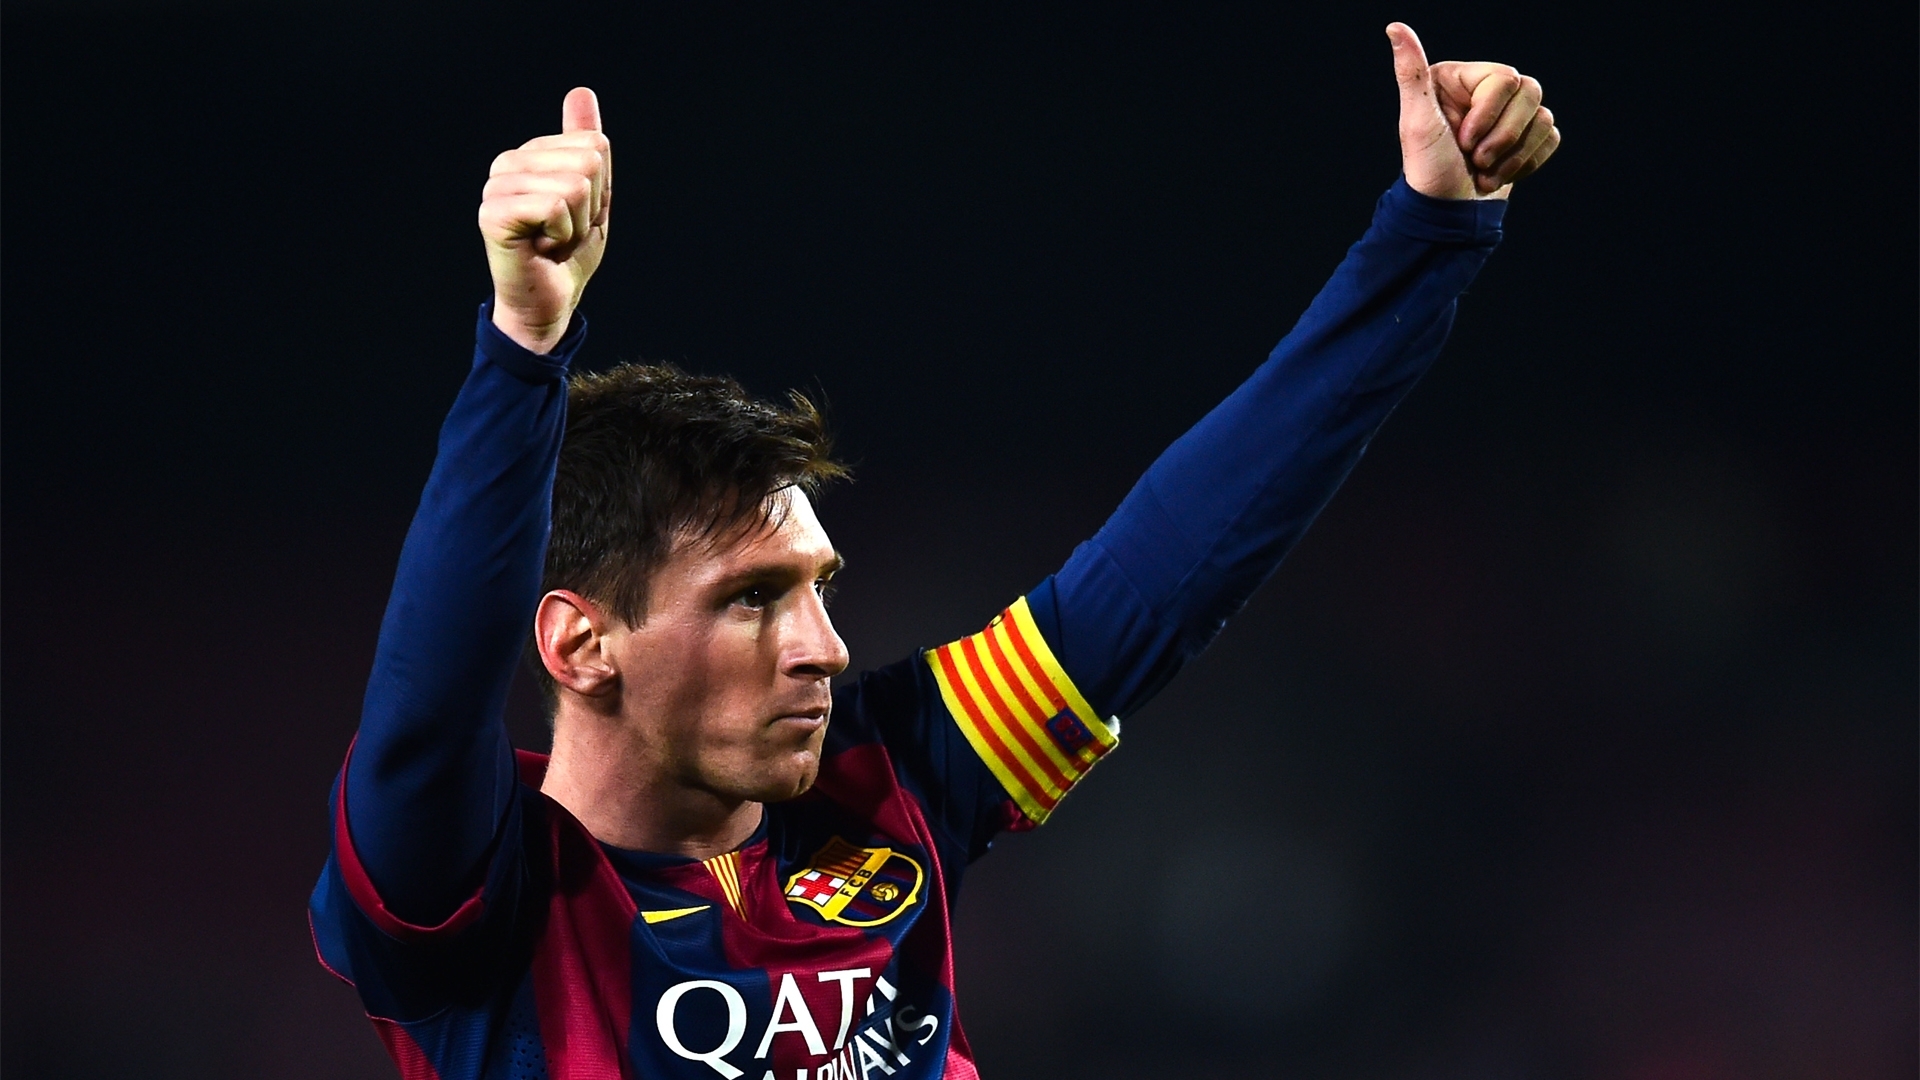 10 New Leo Messi Hd Wallpaper FULL HD 1080p For PC Background